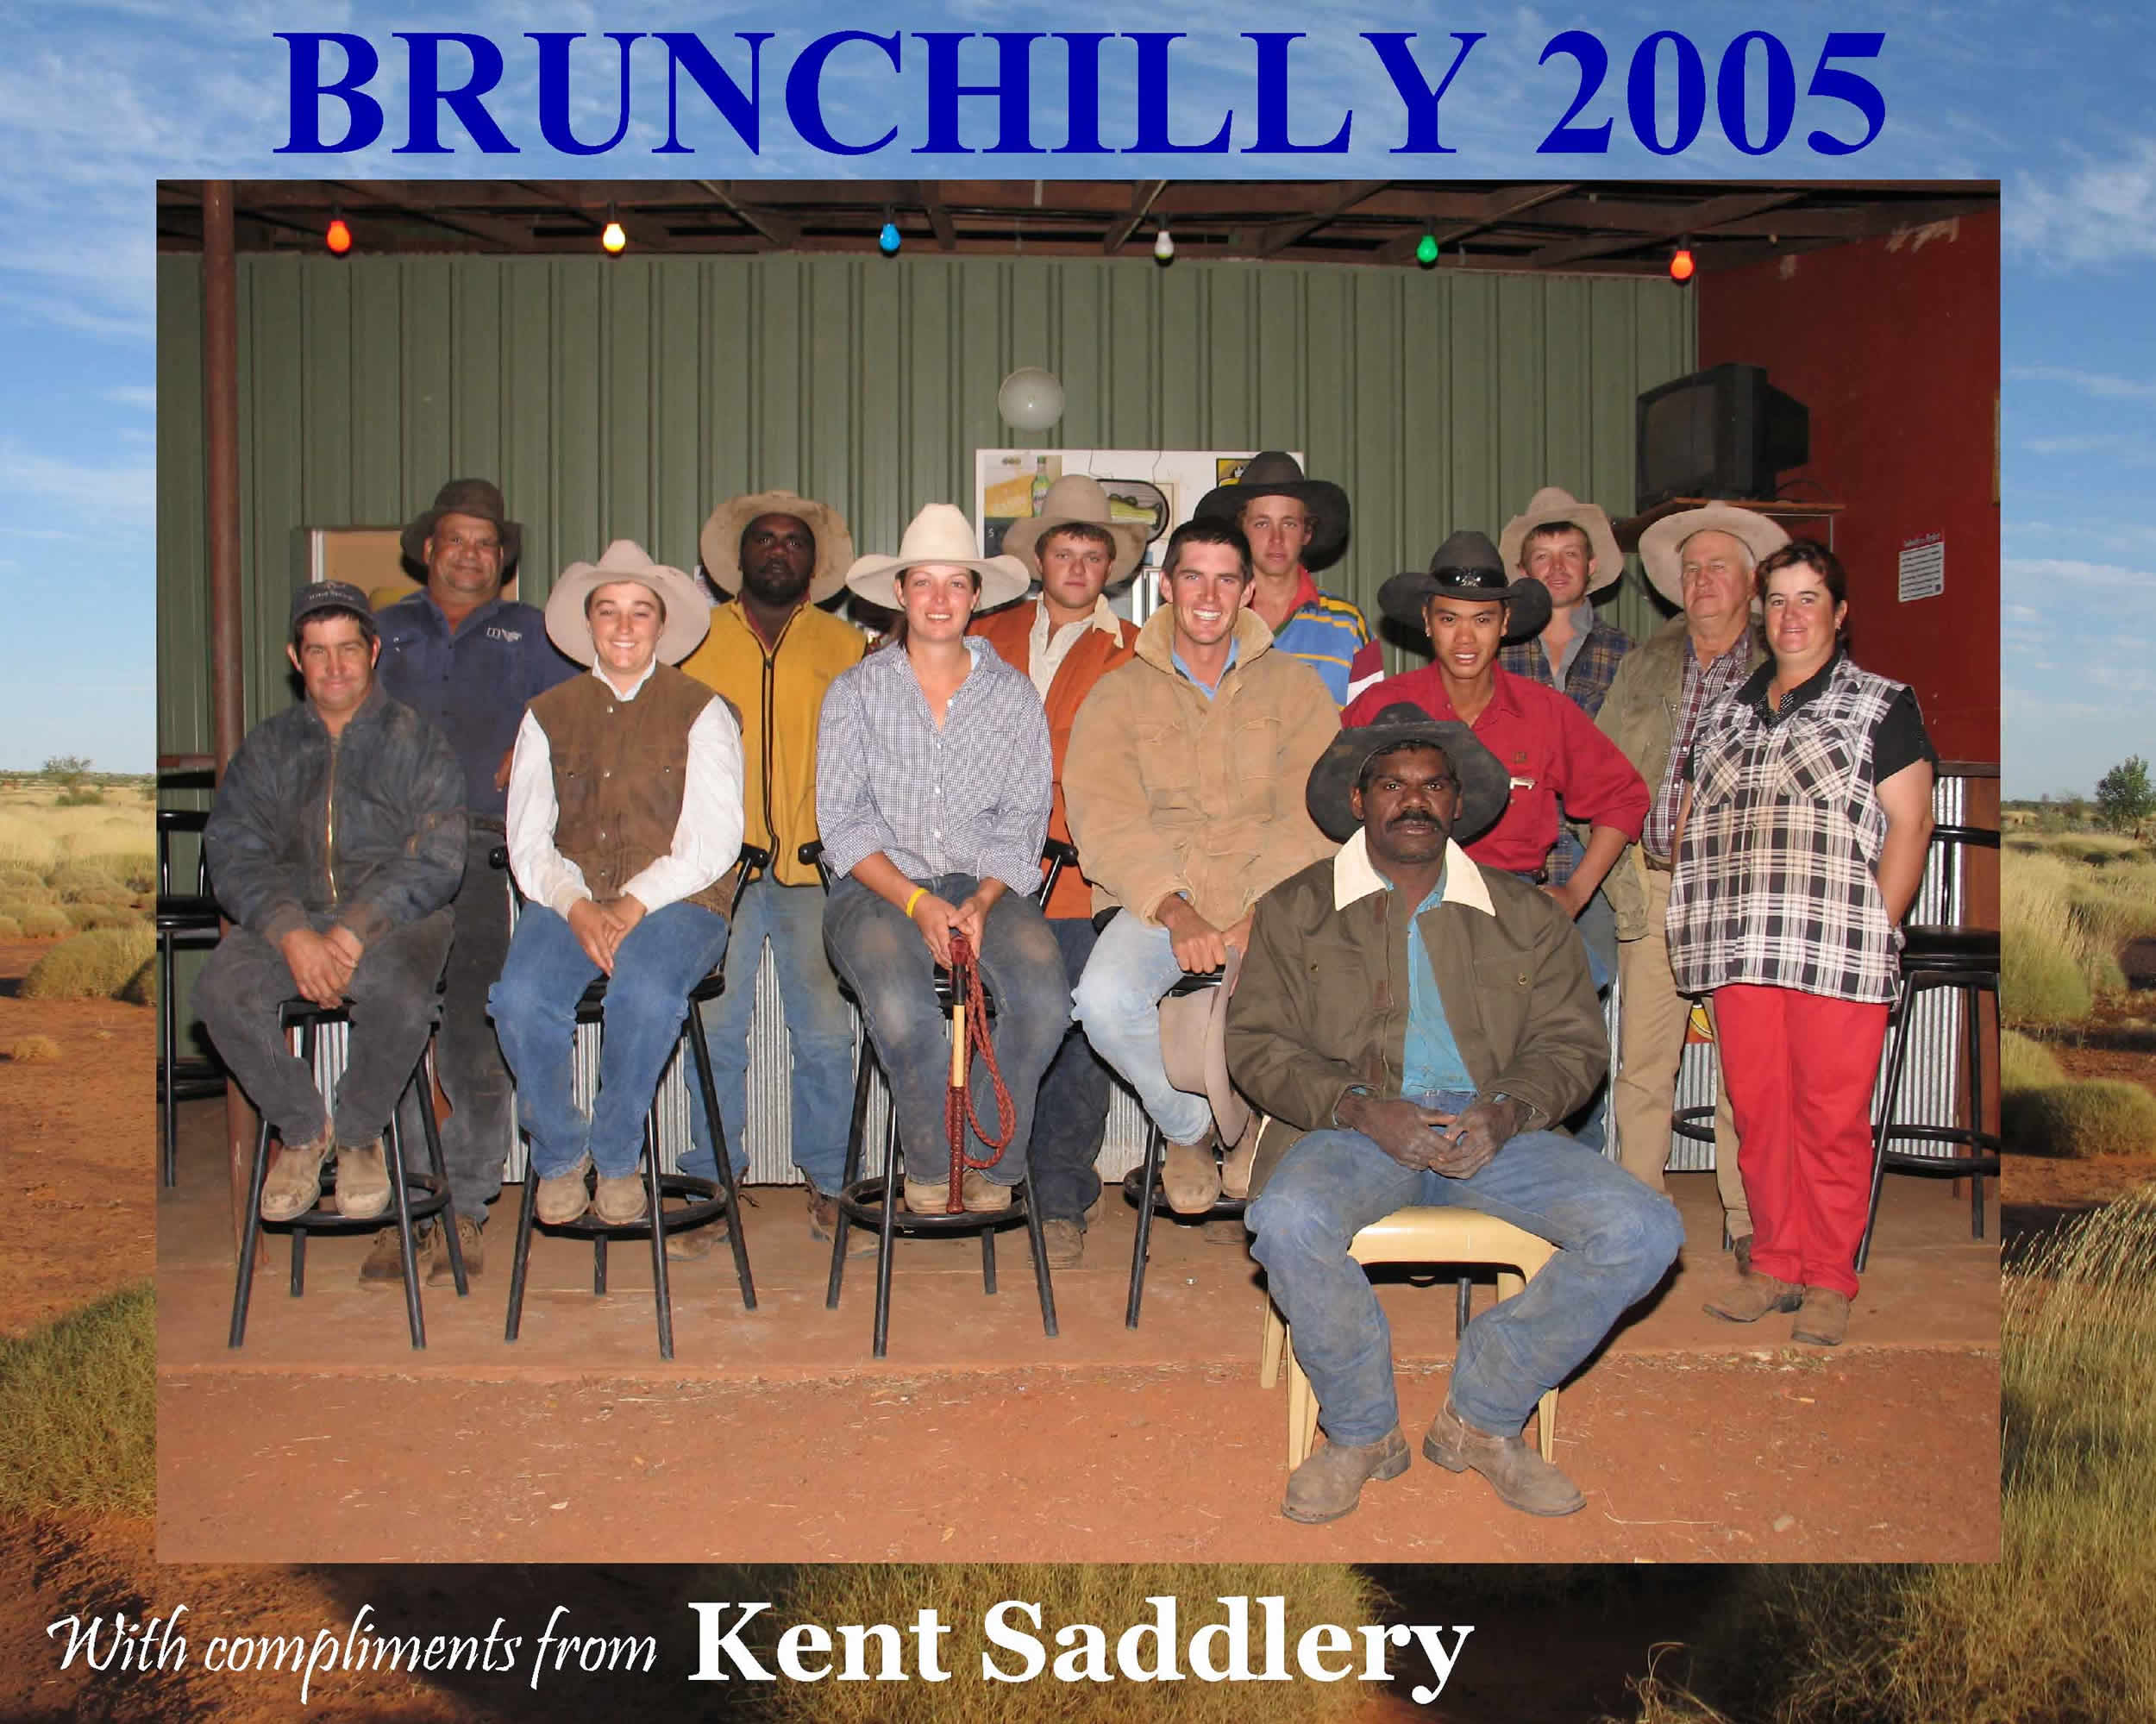 Northern Territory - Brunchilly 26